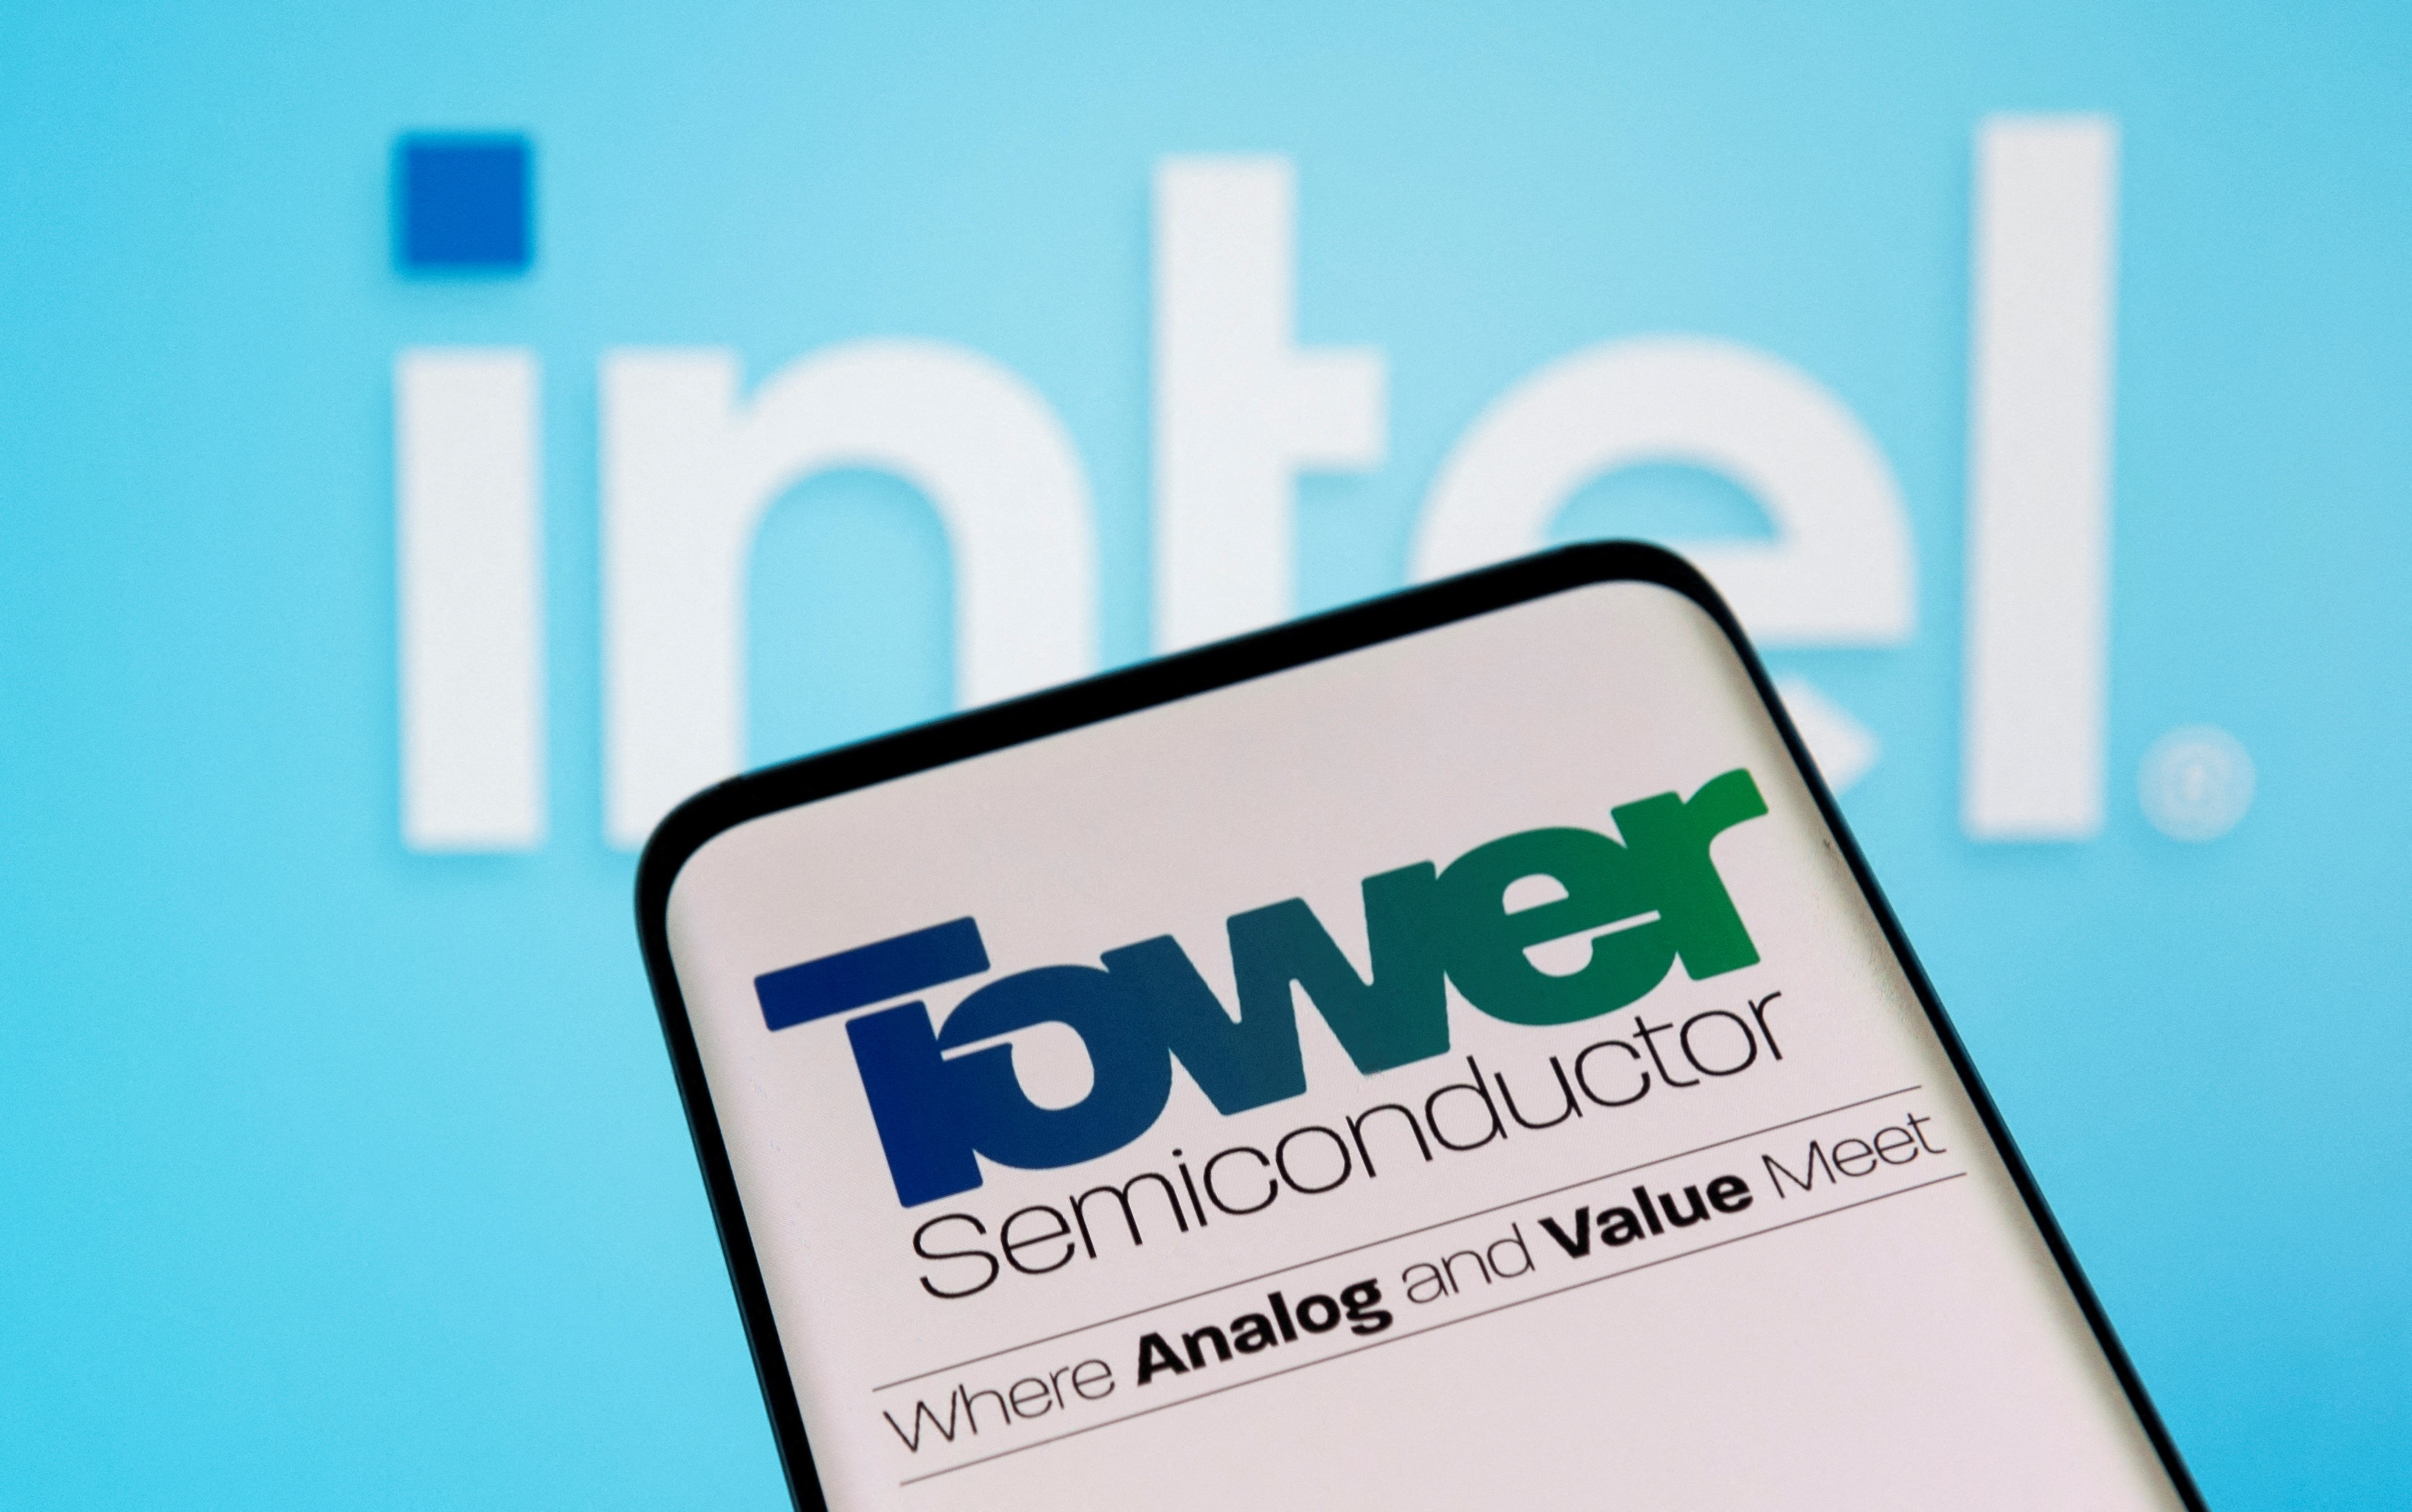 Illustration shows Tower Semiconductor and Intel logos